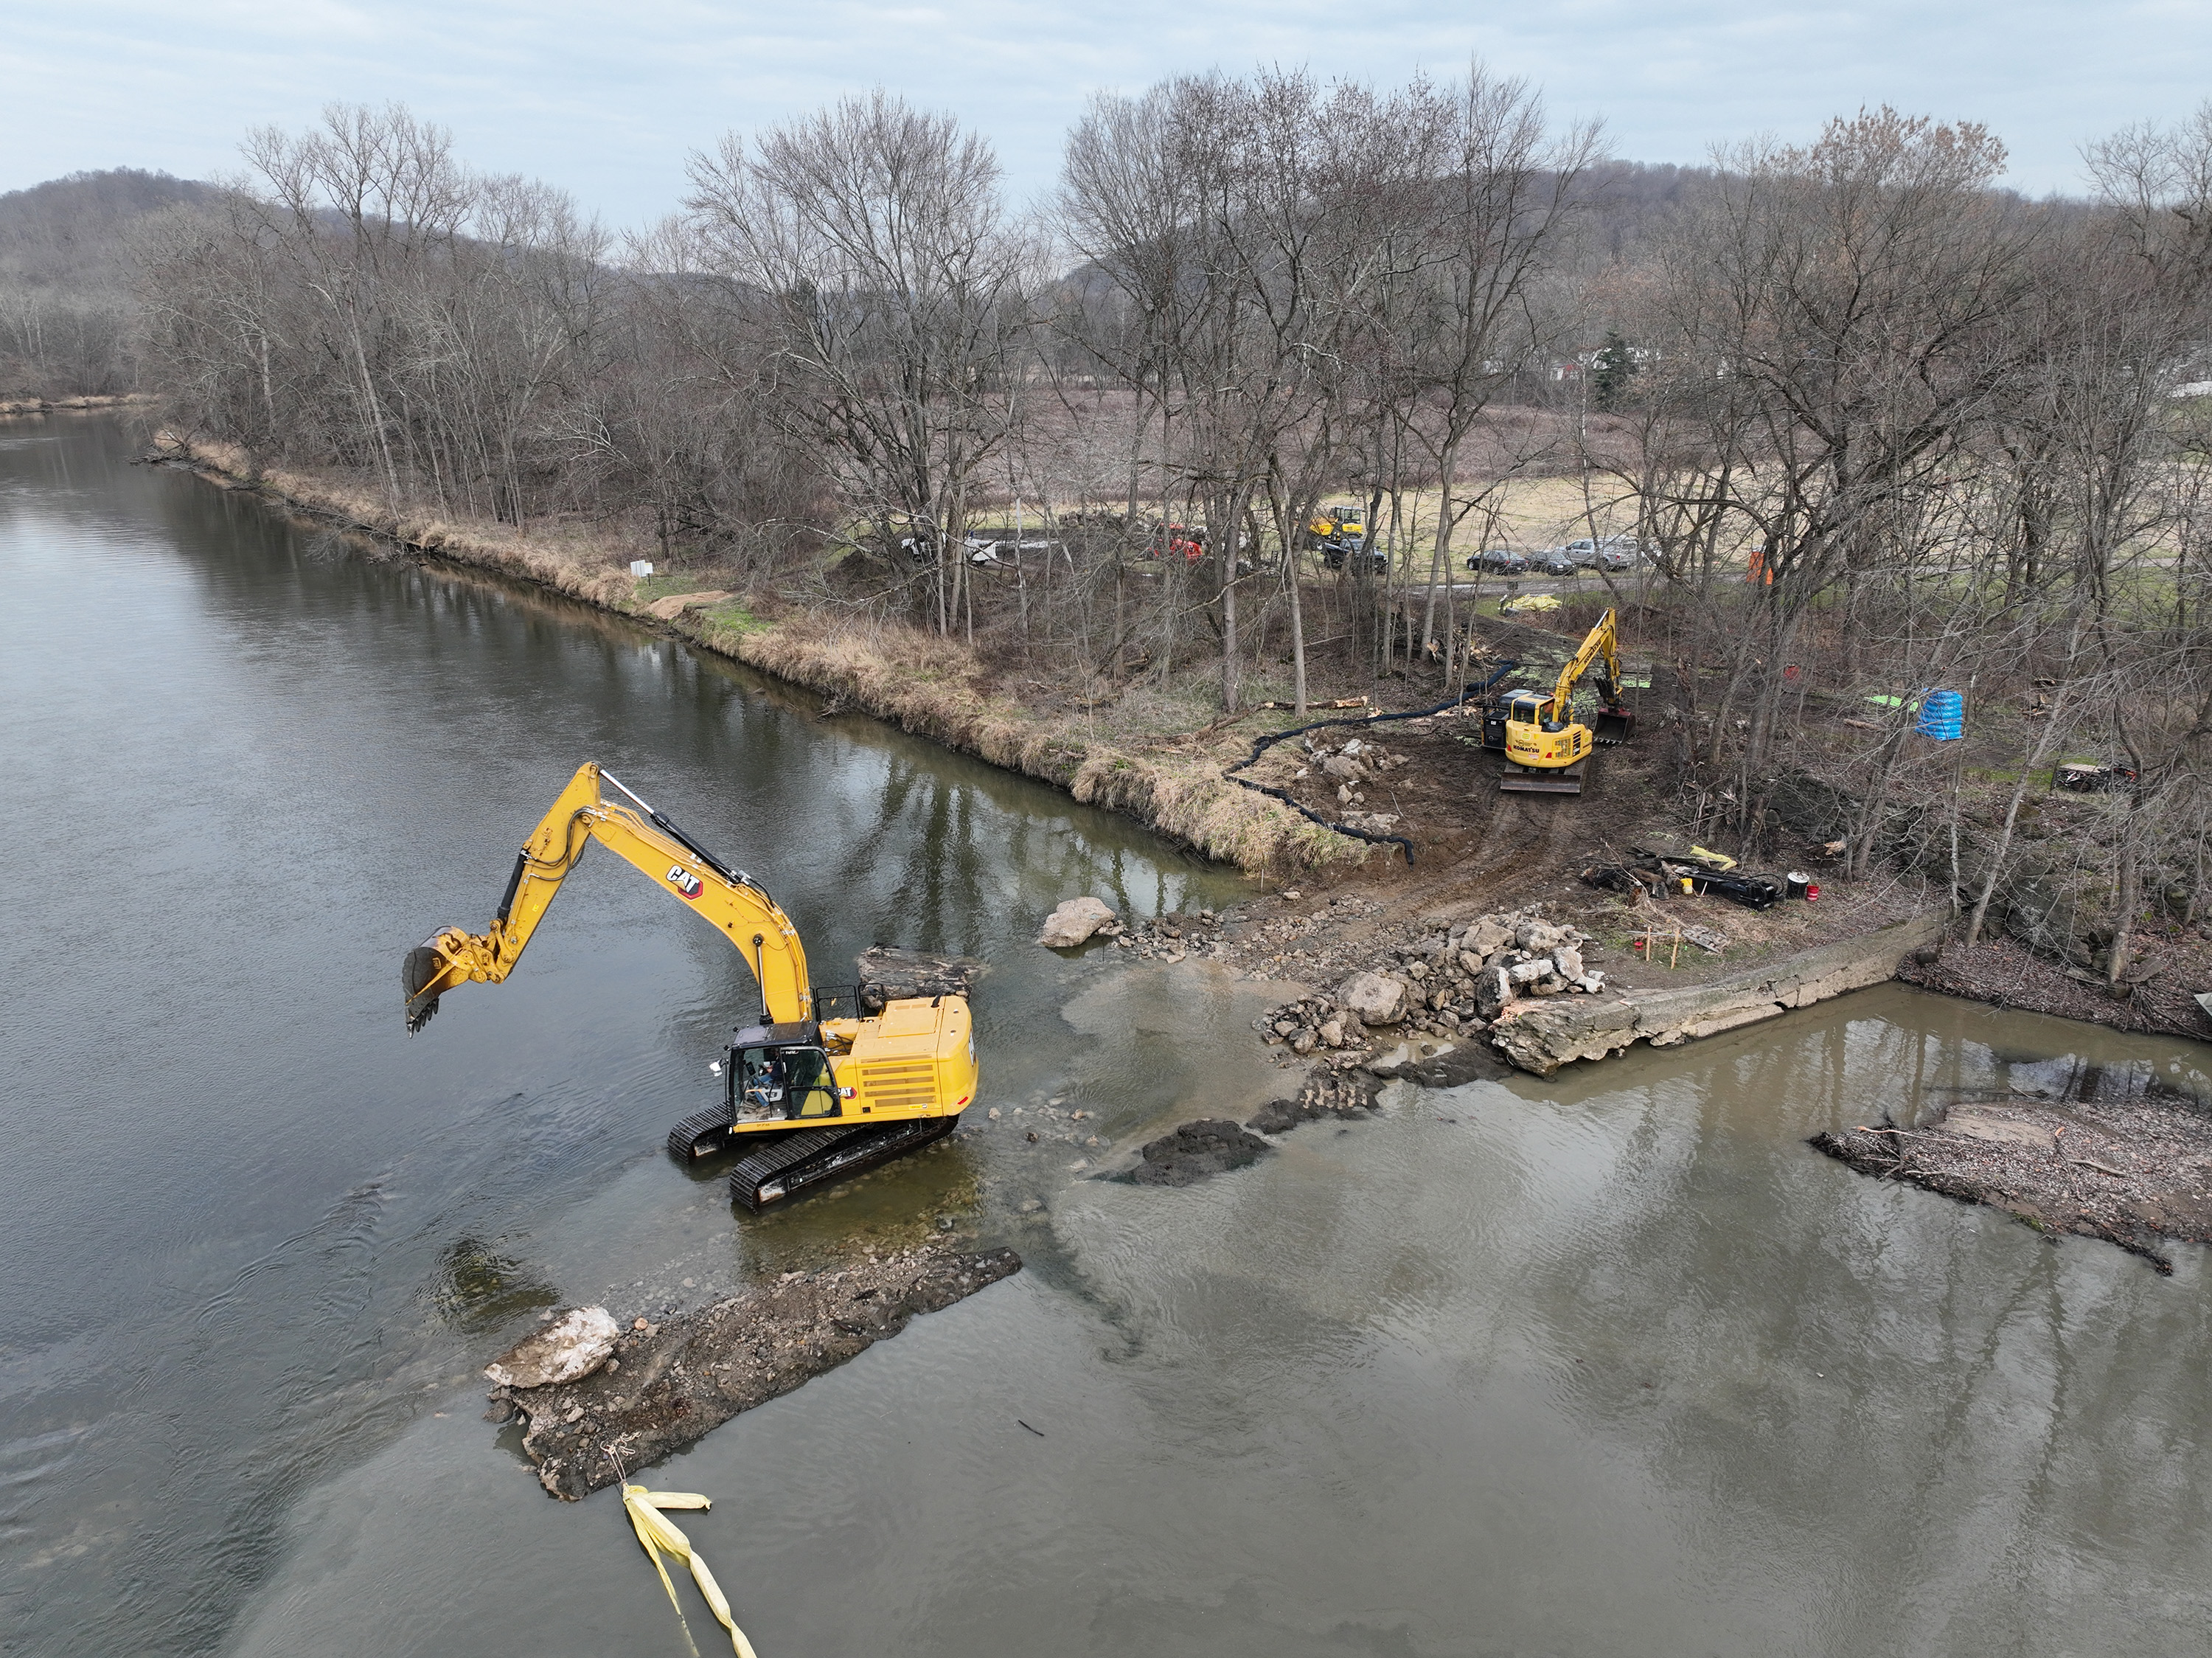 Aerial view of construction equipment working to remove dam in river.